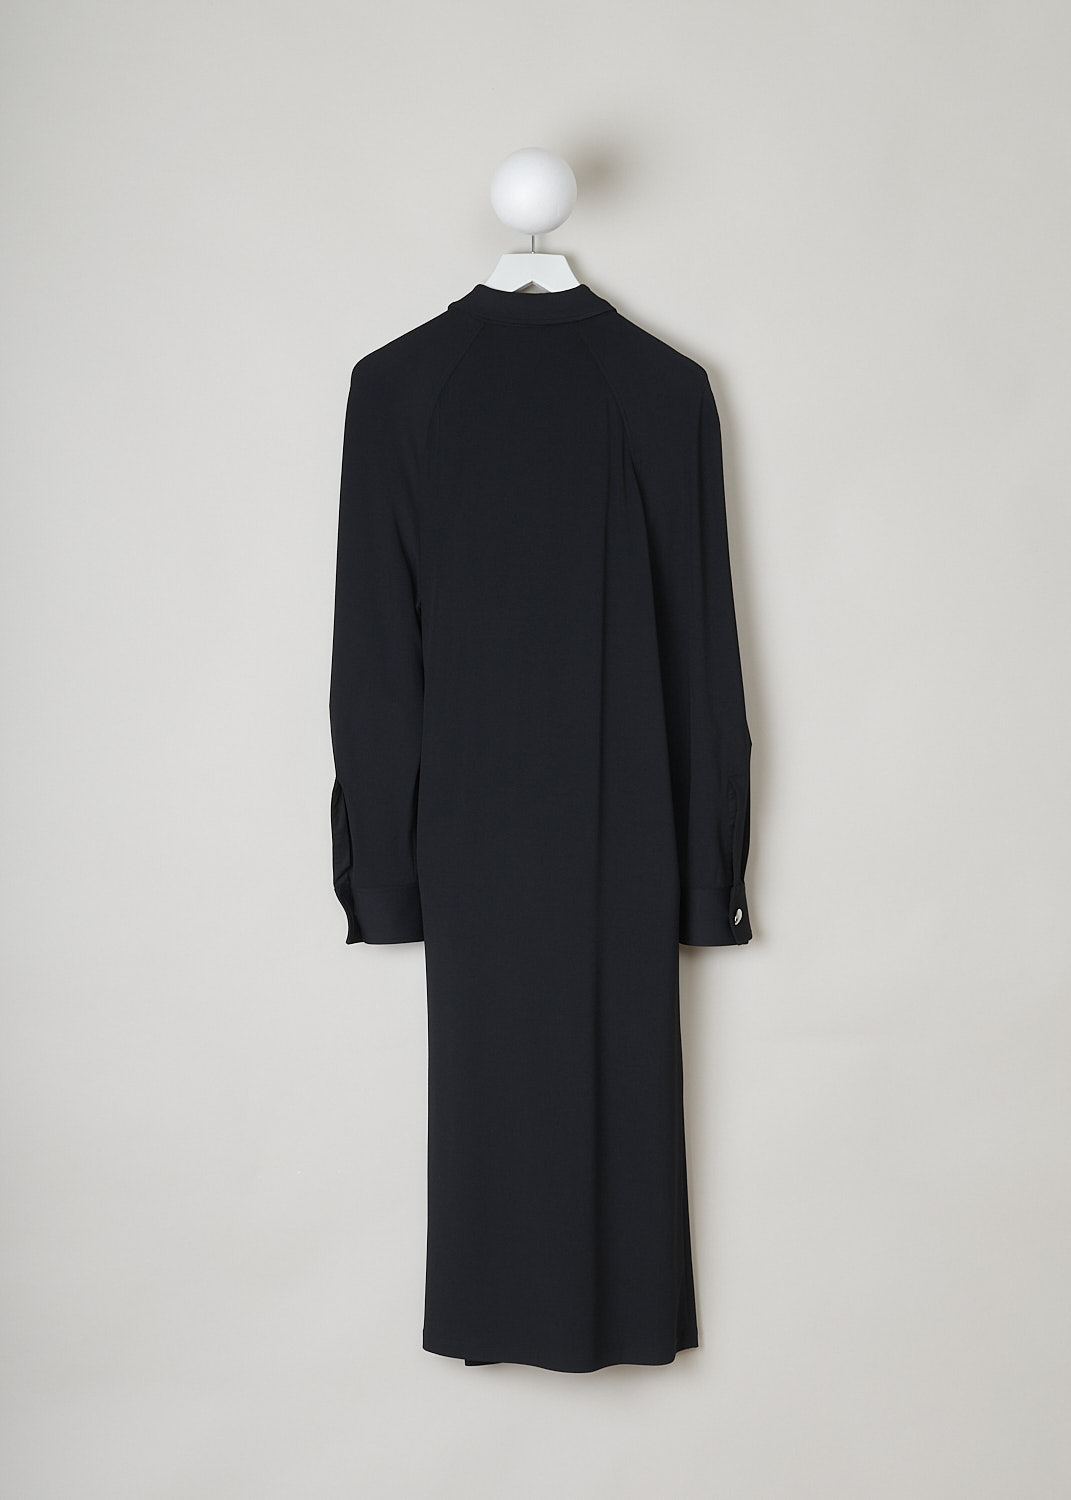 Bottega Veneta, Black blouse dress, 609304_VKIJ0_1000_crÃªpe_jersey, black, back, Black dress with maxi length and a crÃªpe de chine fabric. Featuring a blouse dress model, a pointed collar that leads onto the long cuffed sleeves with a single button. Horseshoe shaped embellishment decorates the front and causes draping pleats which suit this model brilliantly. Furthermore this model comes with a front fastening option being buttons. 